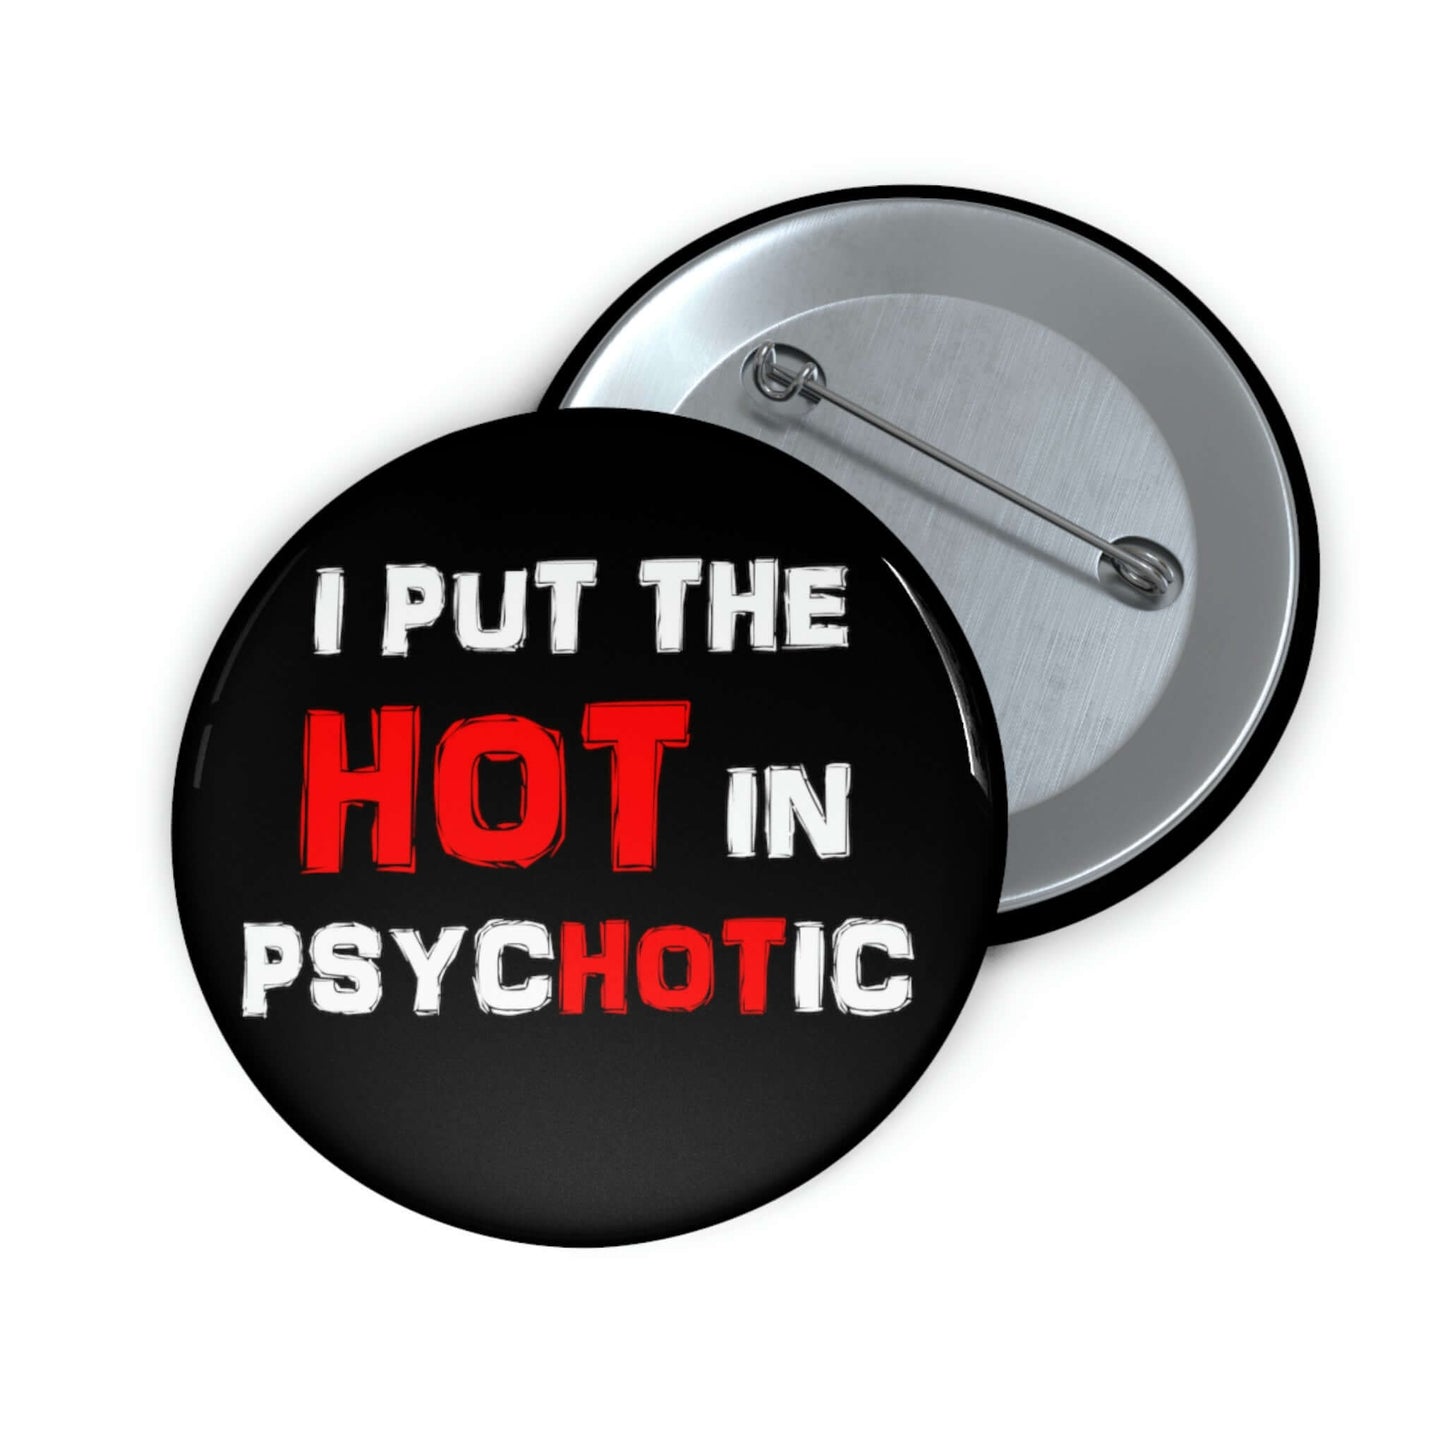 Hot in psychotic pinback button